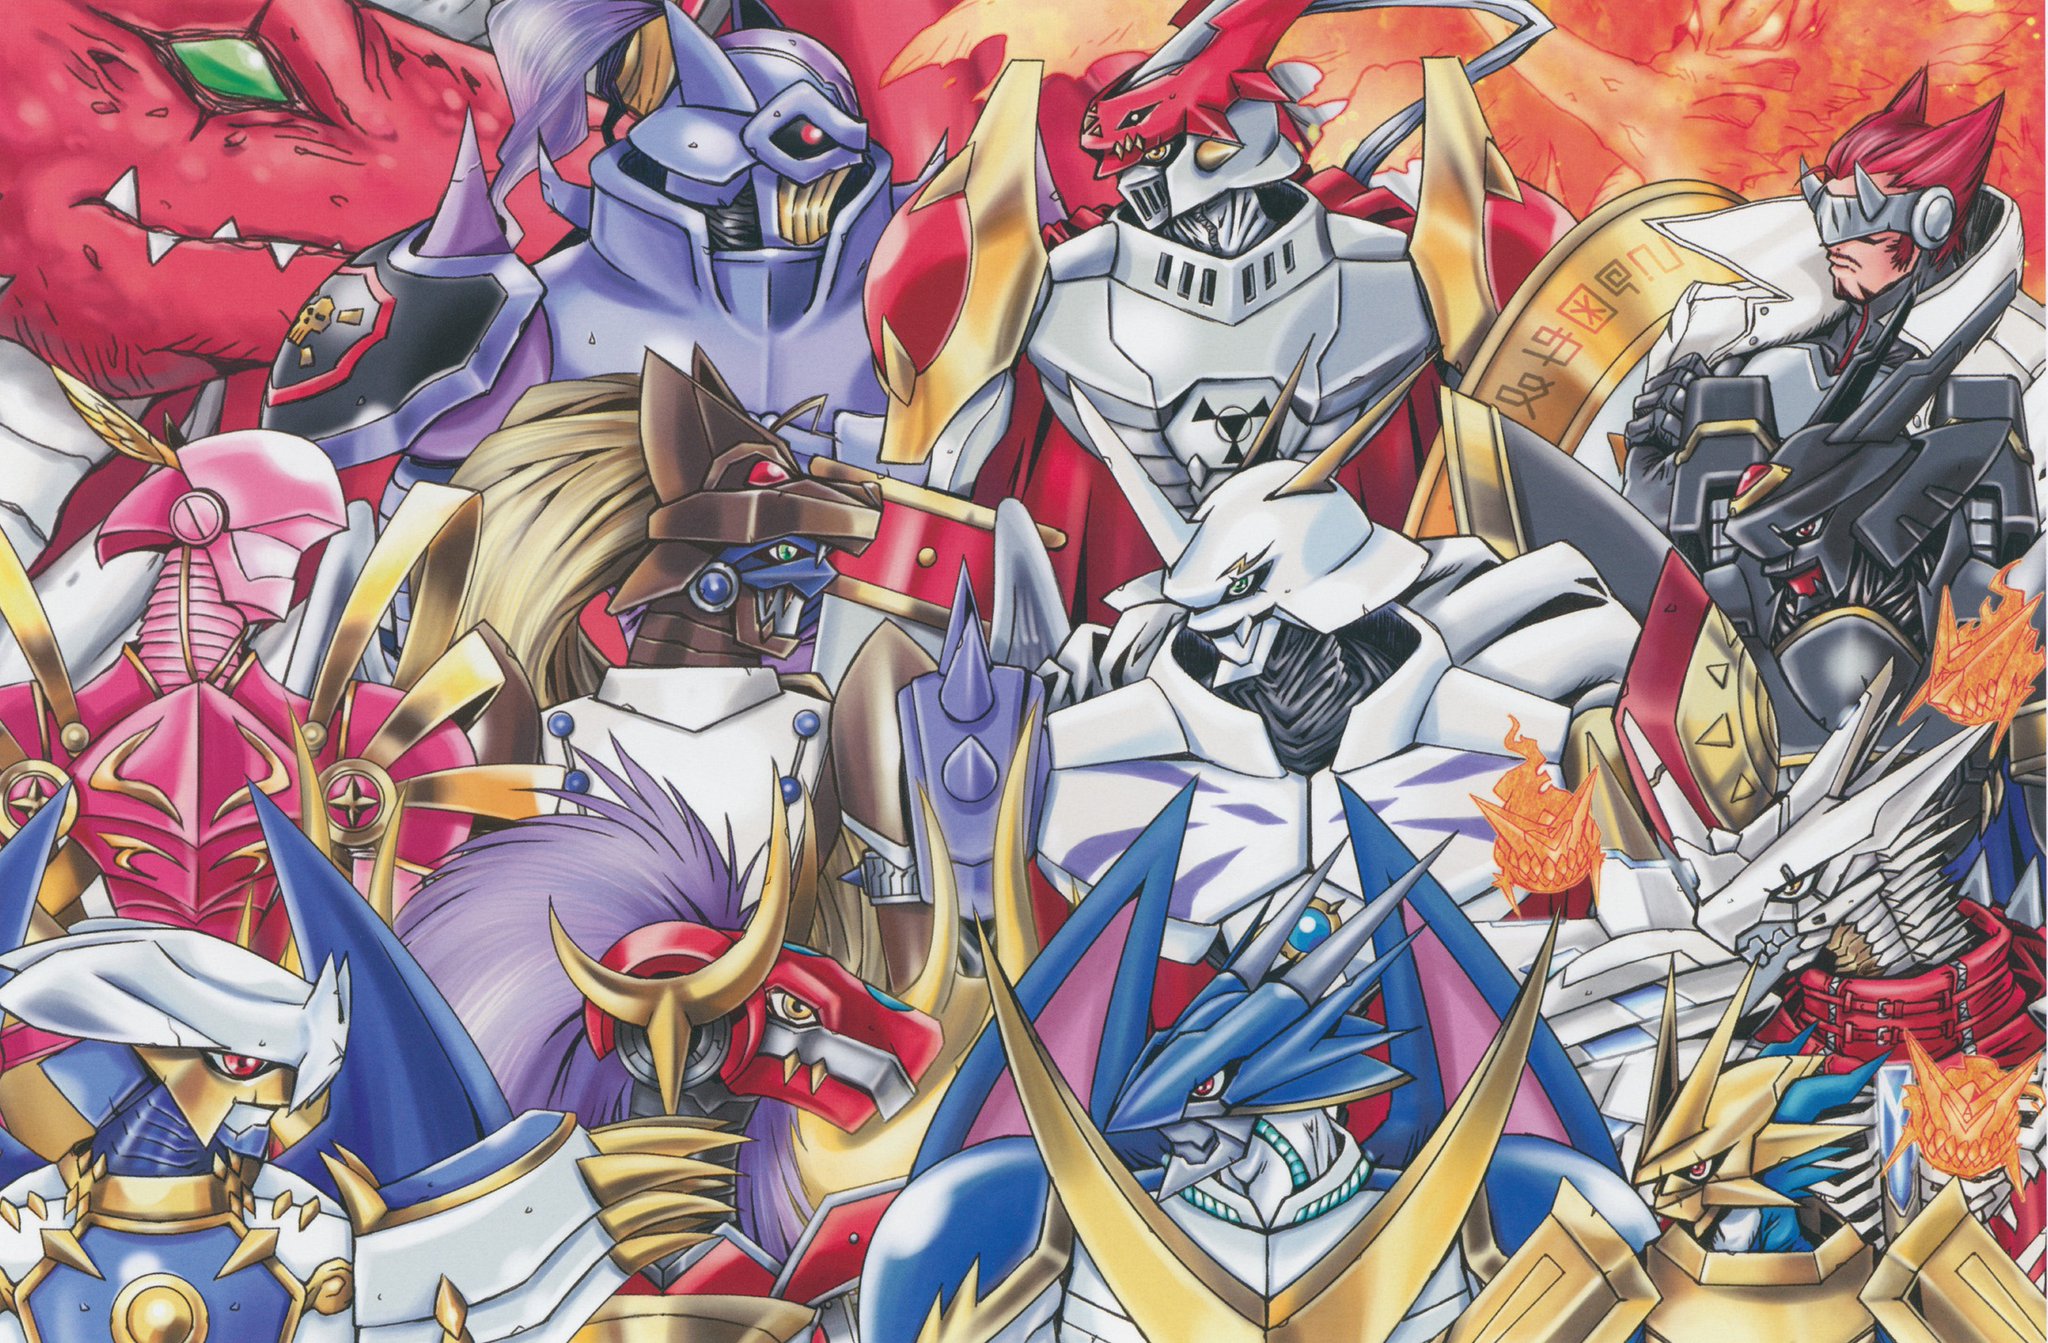 Bandai has told you there are too many royal knights. It gonna be